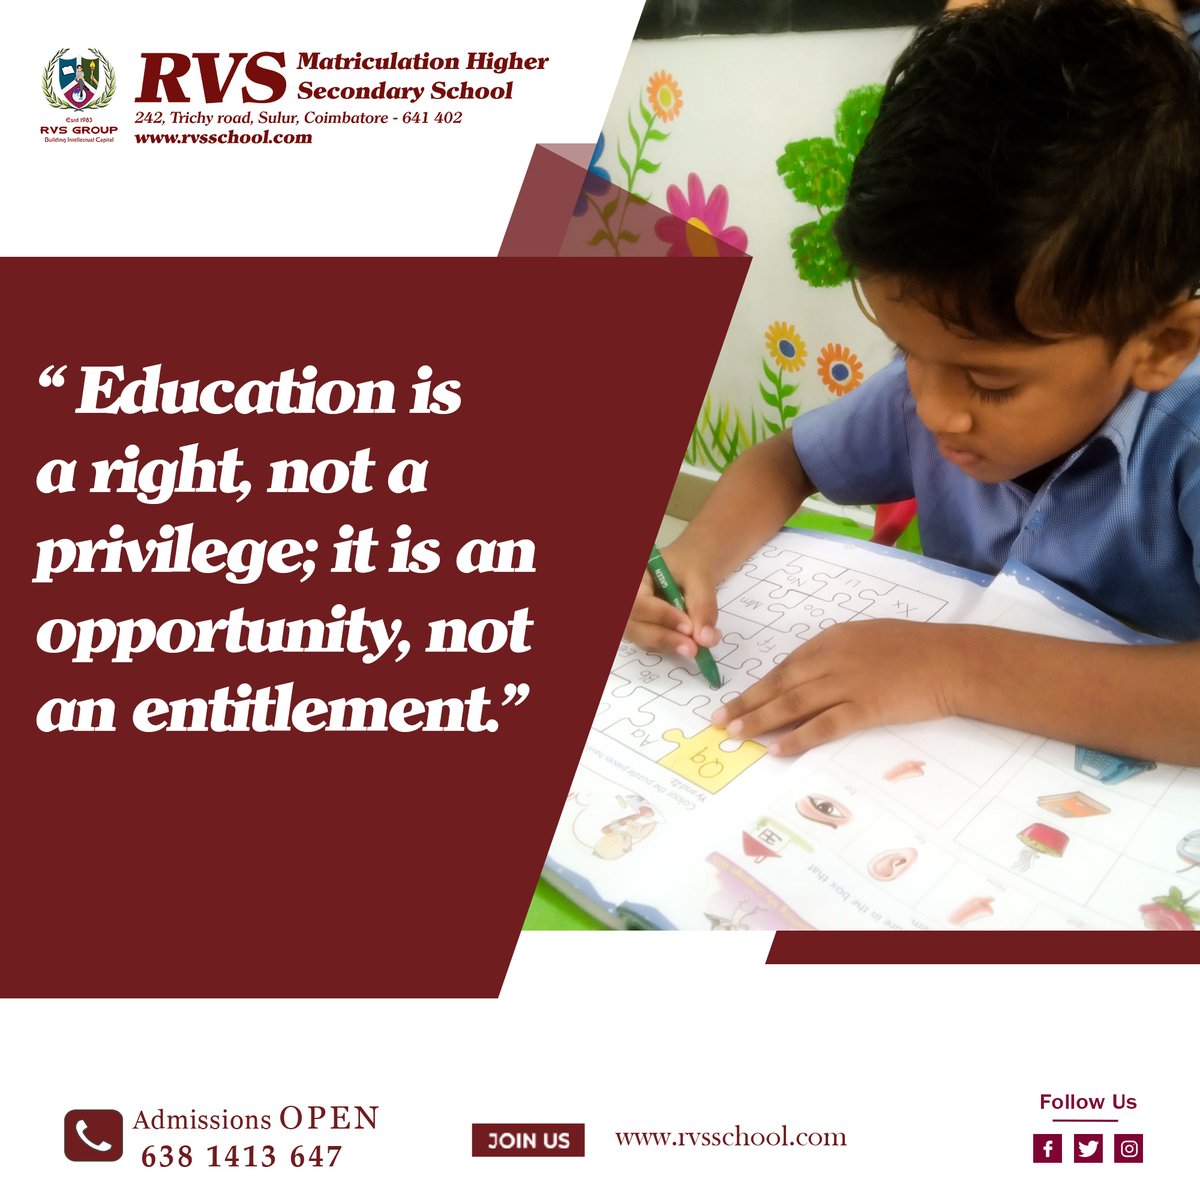 'Education is a Right, not a privilege; it is an opportunity, not an entitlement.'
#coimbatoreschool #coimbatoreschools #sulur #sulurschool
#rvsschool #rvsmatriculationhrsecschool #schoollife #classroom #schoolmemories
#happybirthday